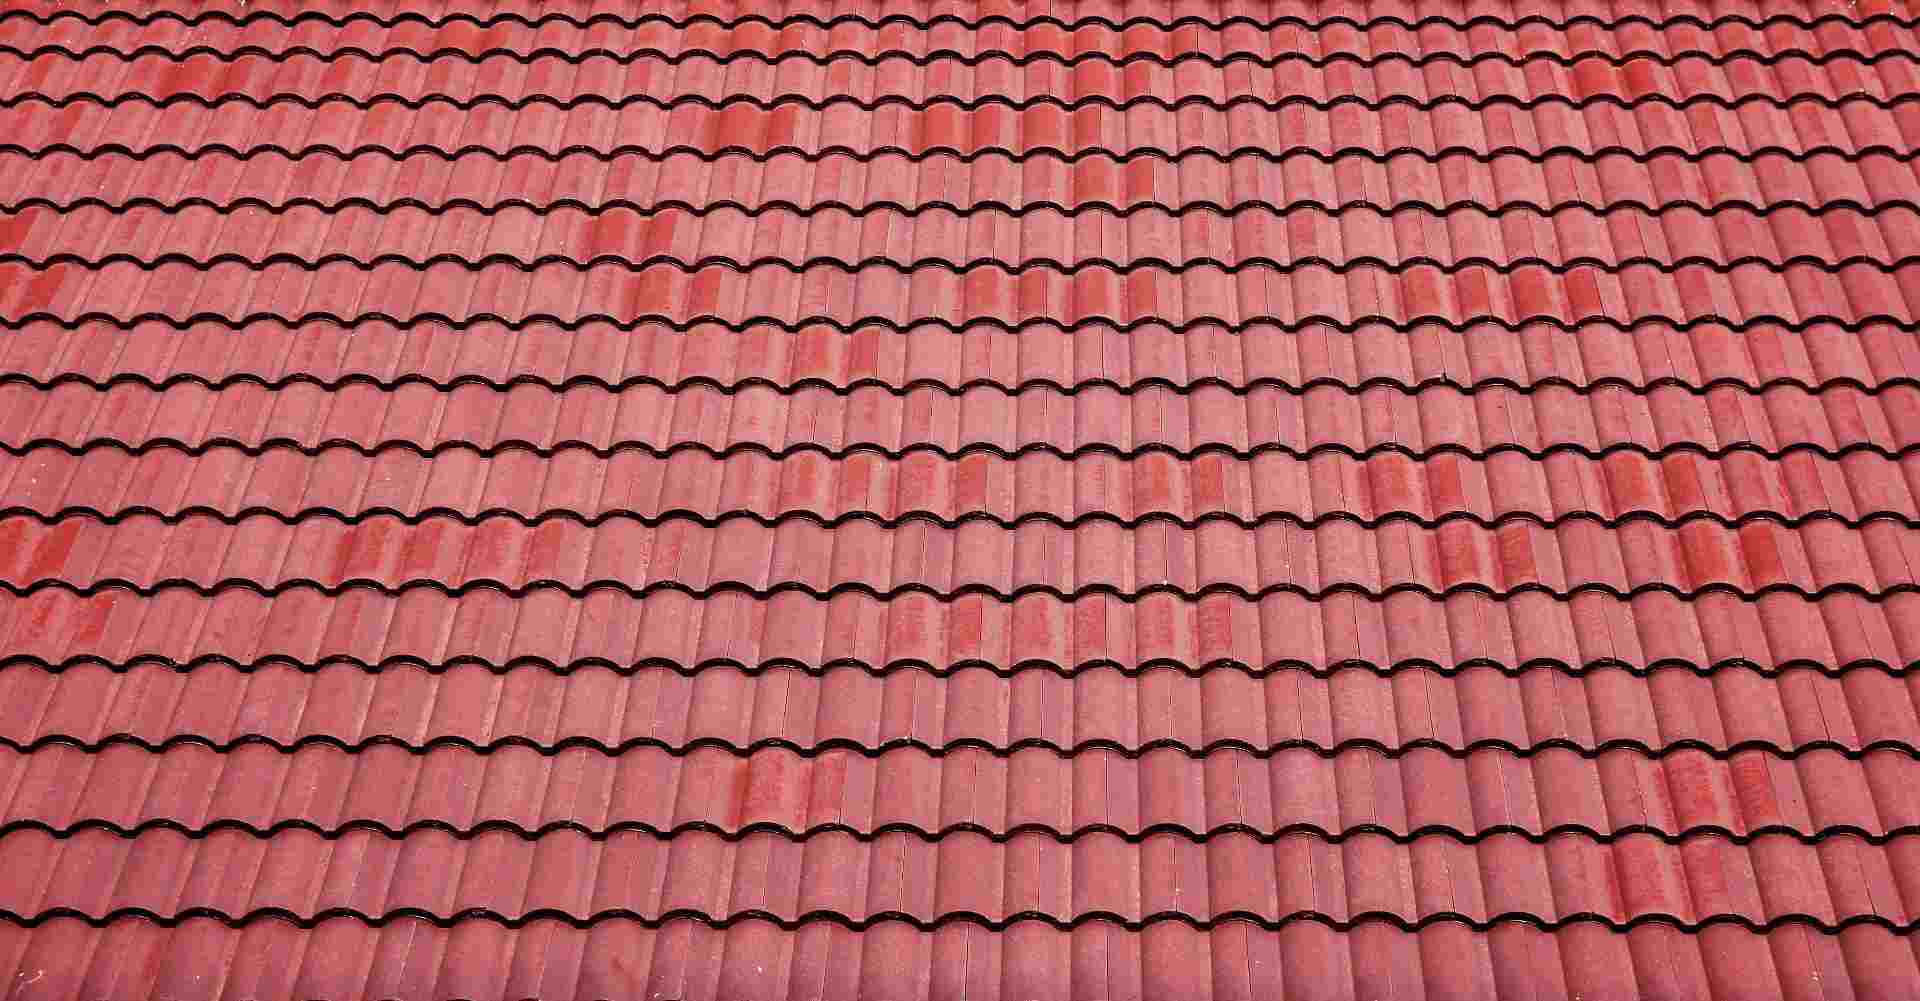 Ceramic Roofing Roofing Hola Home